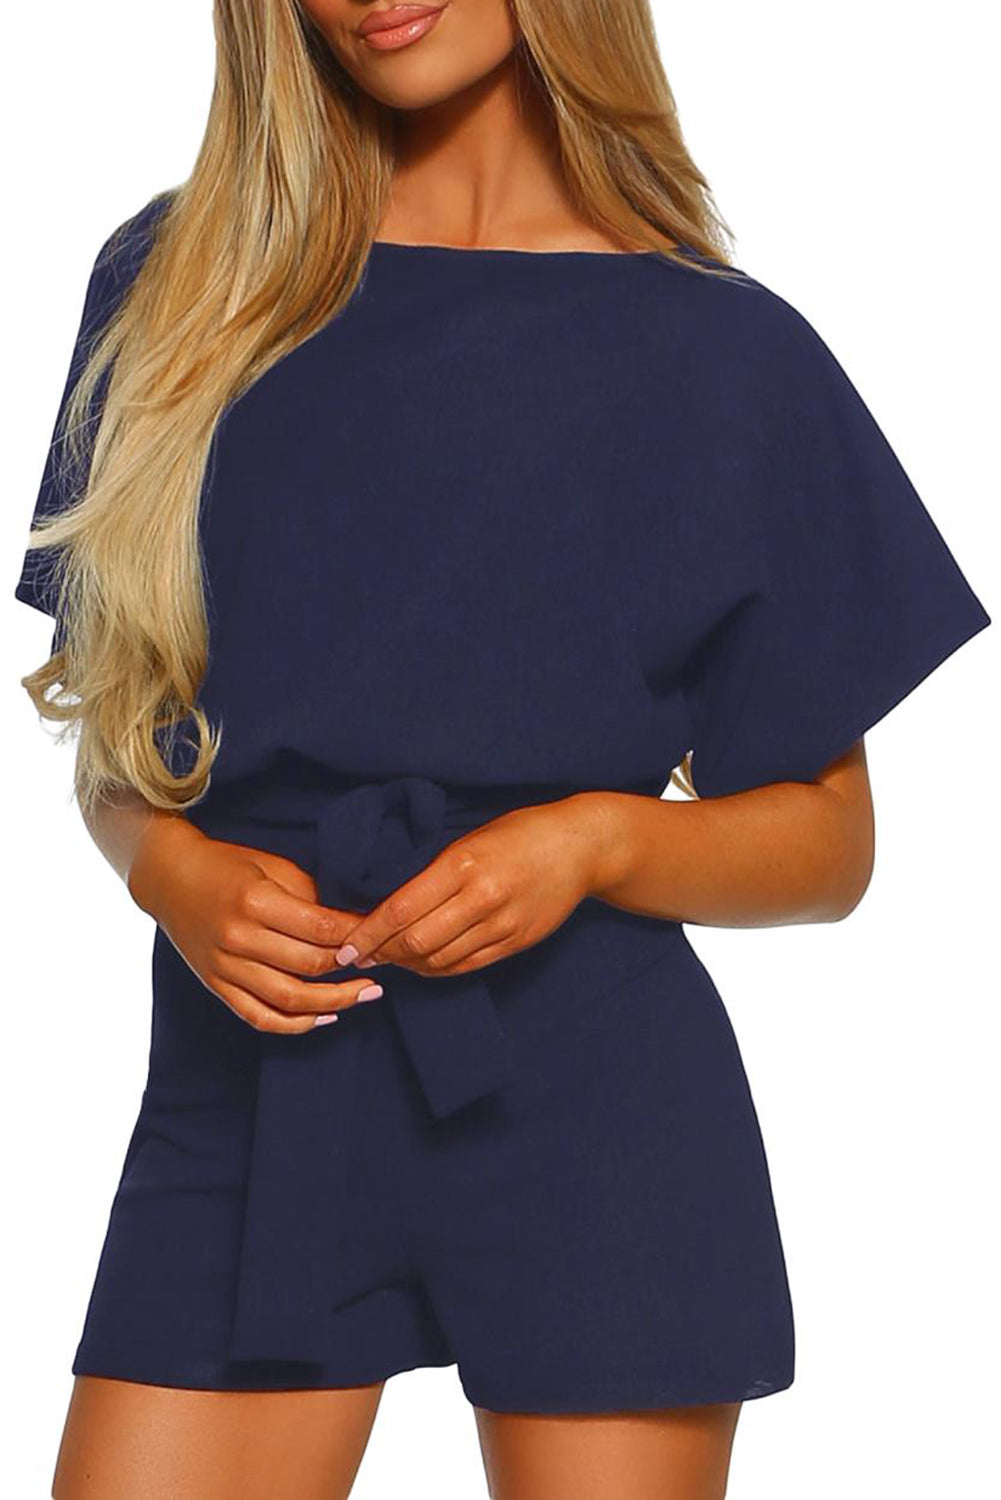 Blue Over The Top Belted Playsuit 95%Polyester+5%Spandex Jumpsuits & Rompers JT's Designer Fashion